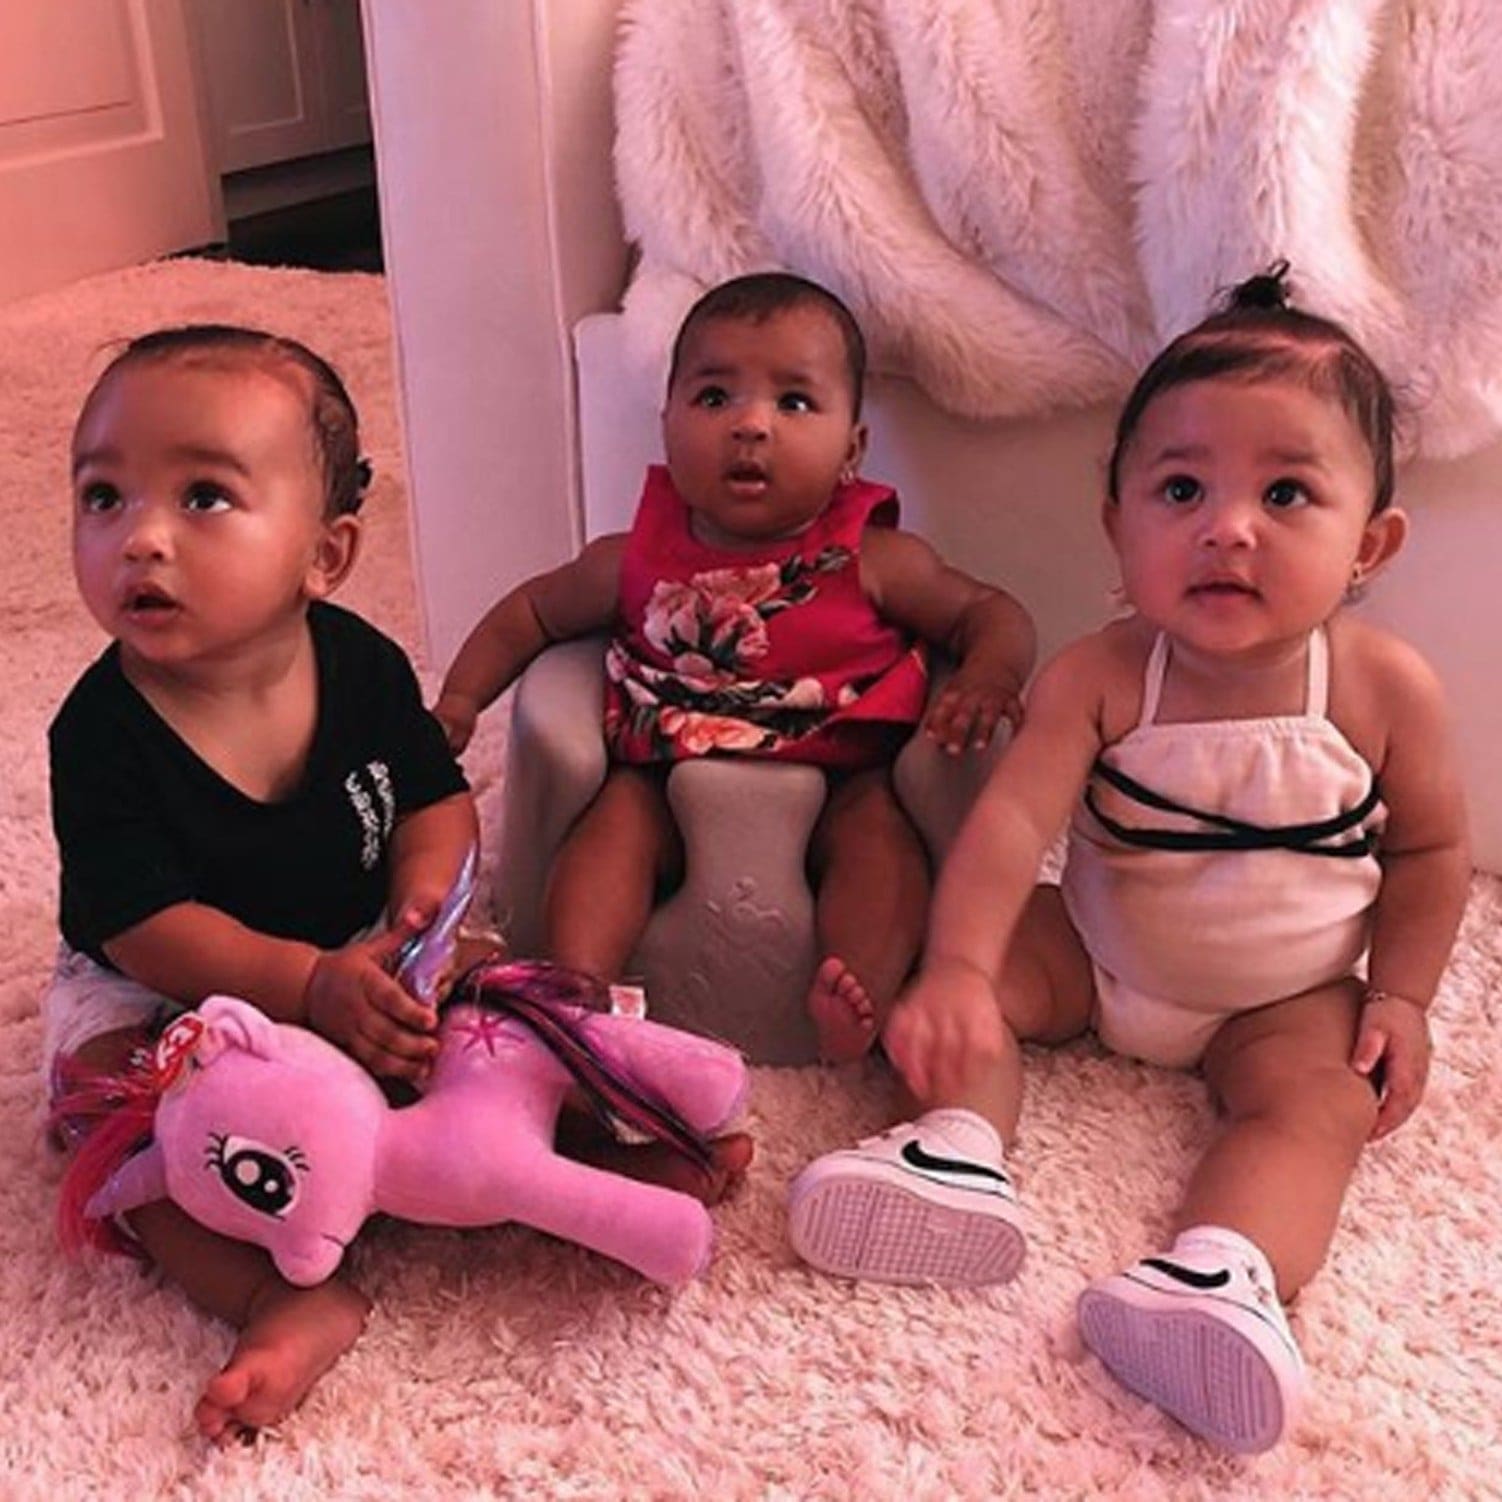 ”kylie-jenner-shares-gorgeous-pics-of-stormi-true-and-chicago-fans-are-trying-to-figure-out-who-the-baby-girls-look-like”